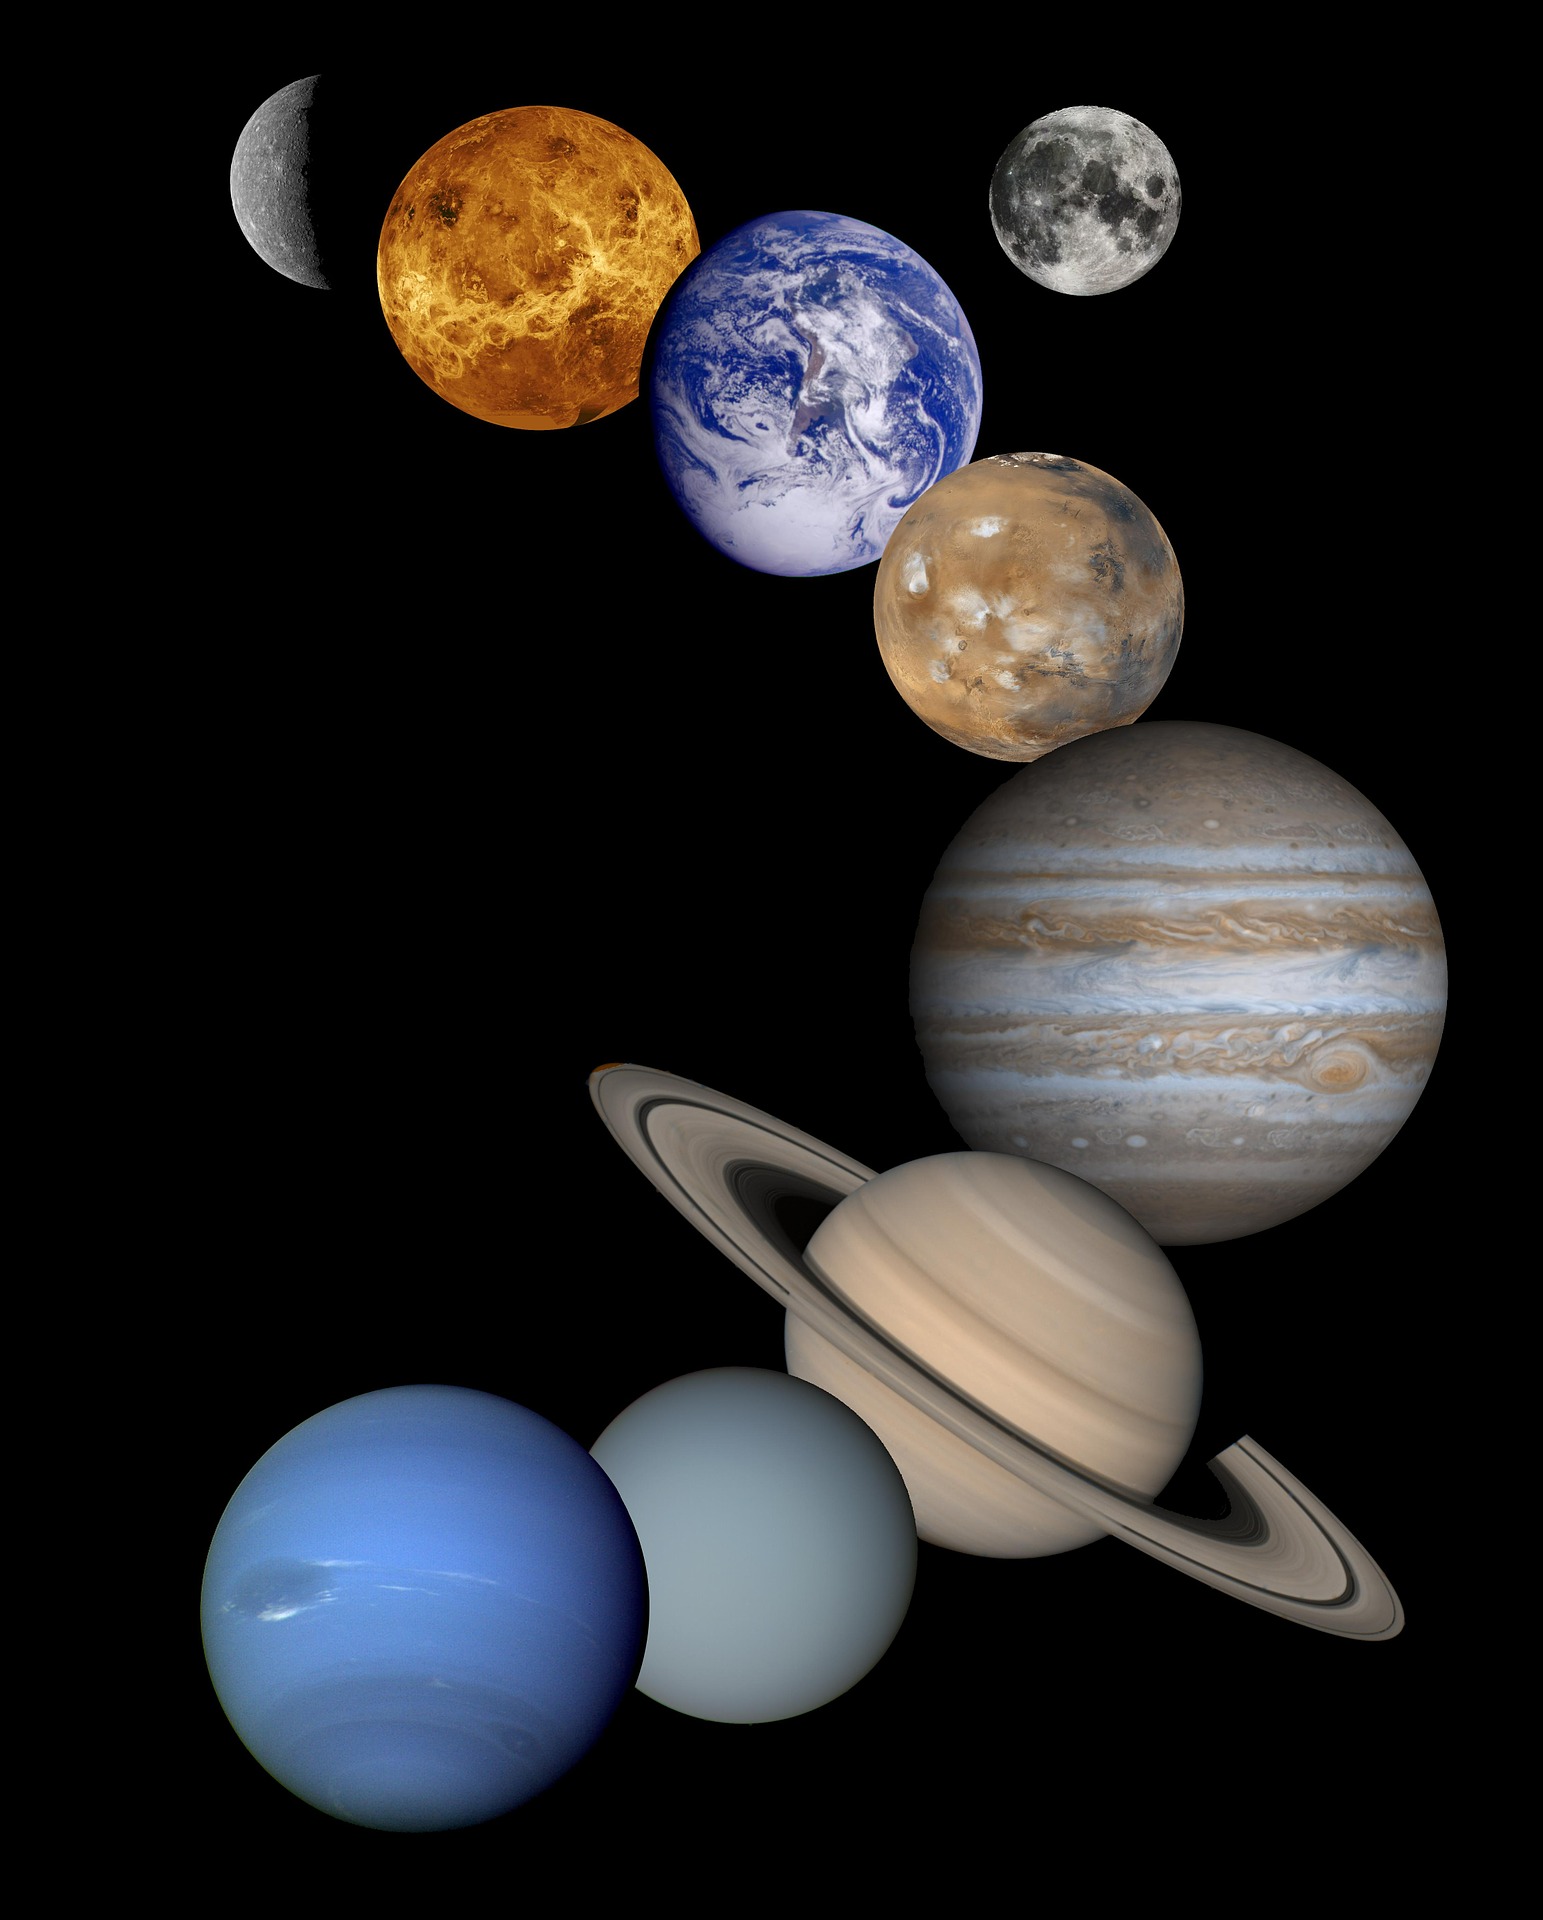 Quick ways to differentiate our 8 planets